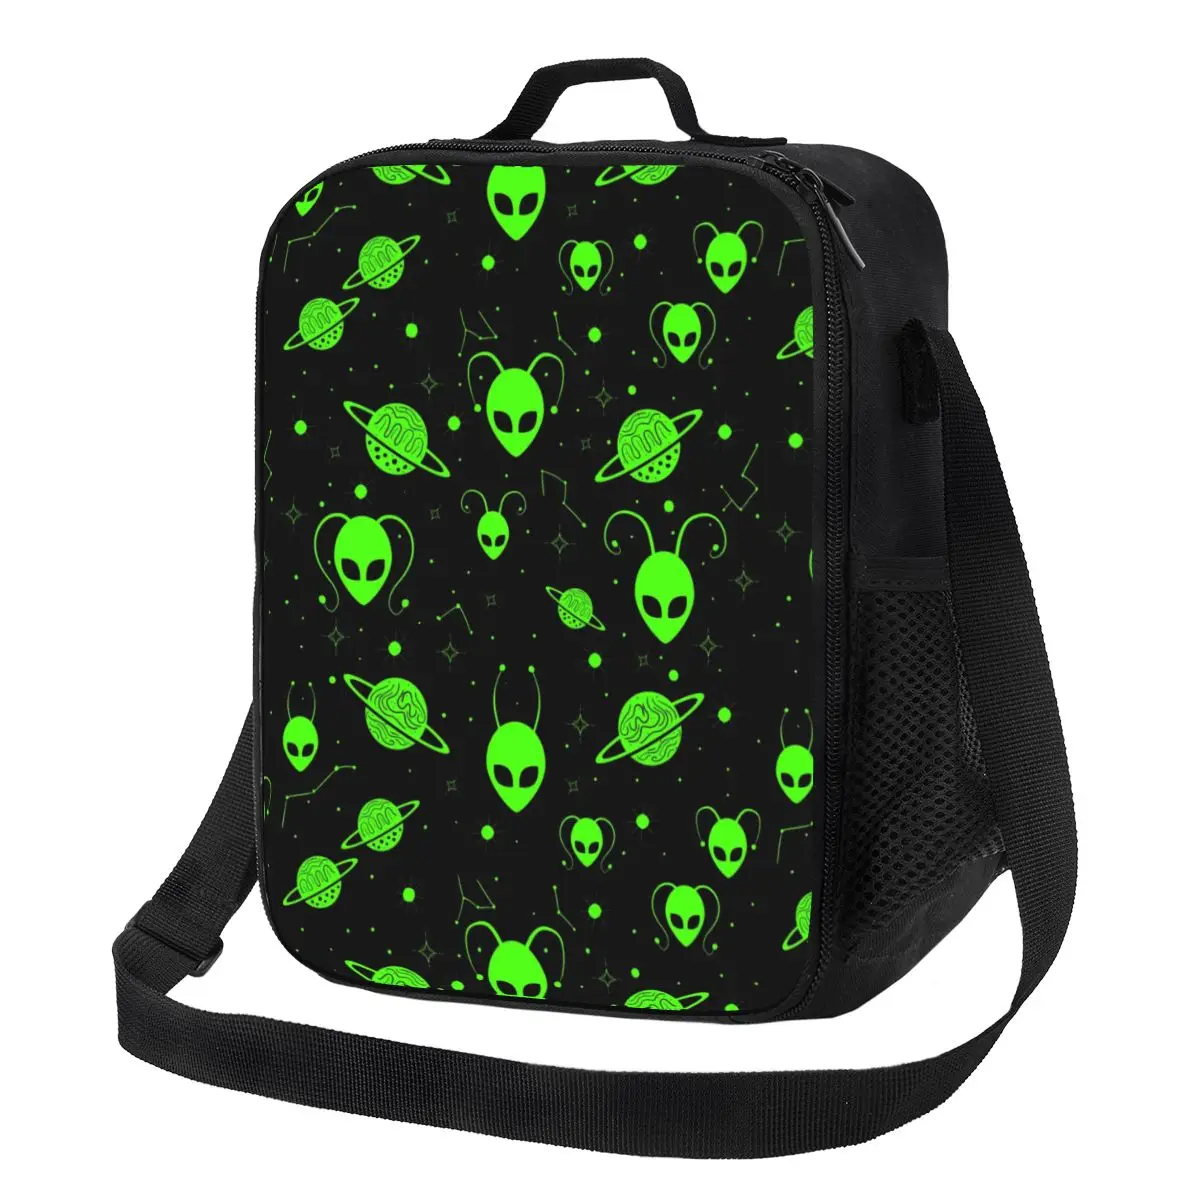 

Green Alien Universe Wondrous Cosmos With Planet And Stars Resuable Lunch Box Cooler Thermal Food Insulated Lunch Bag School